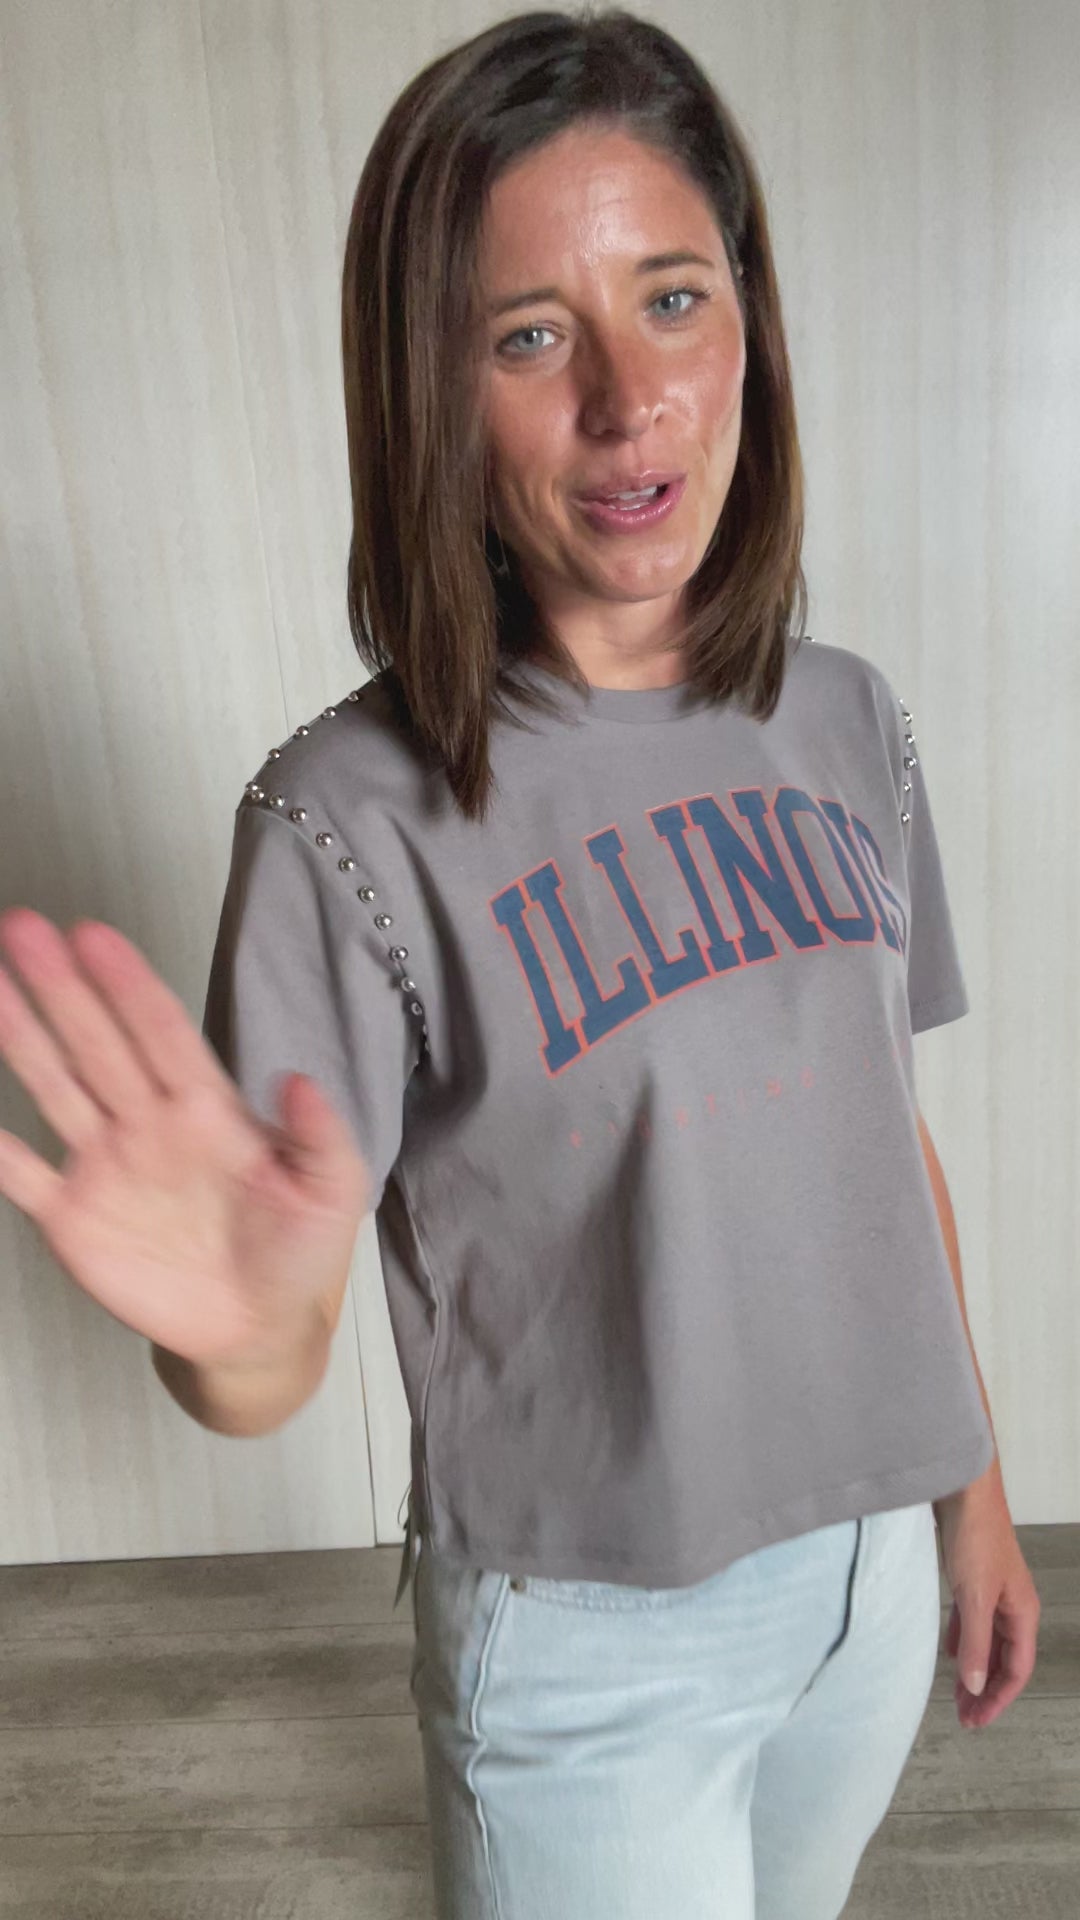 Gray Illinois Cropped Tee with Stud Silver Stud Detail | Champaign-Urbana Women's fanwear game day clothing boutique